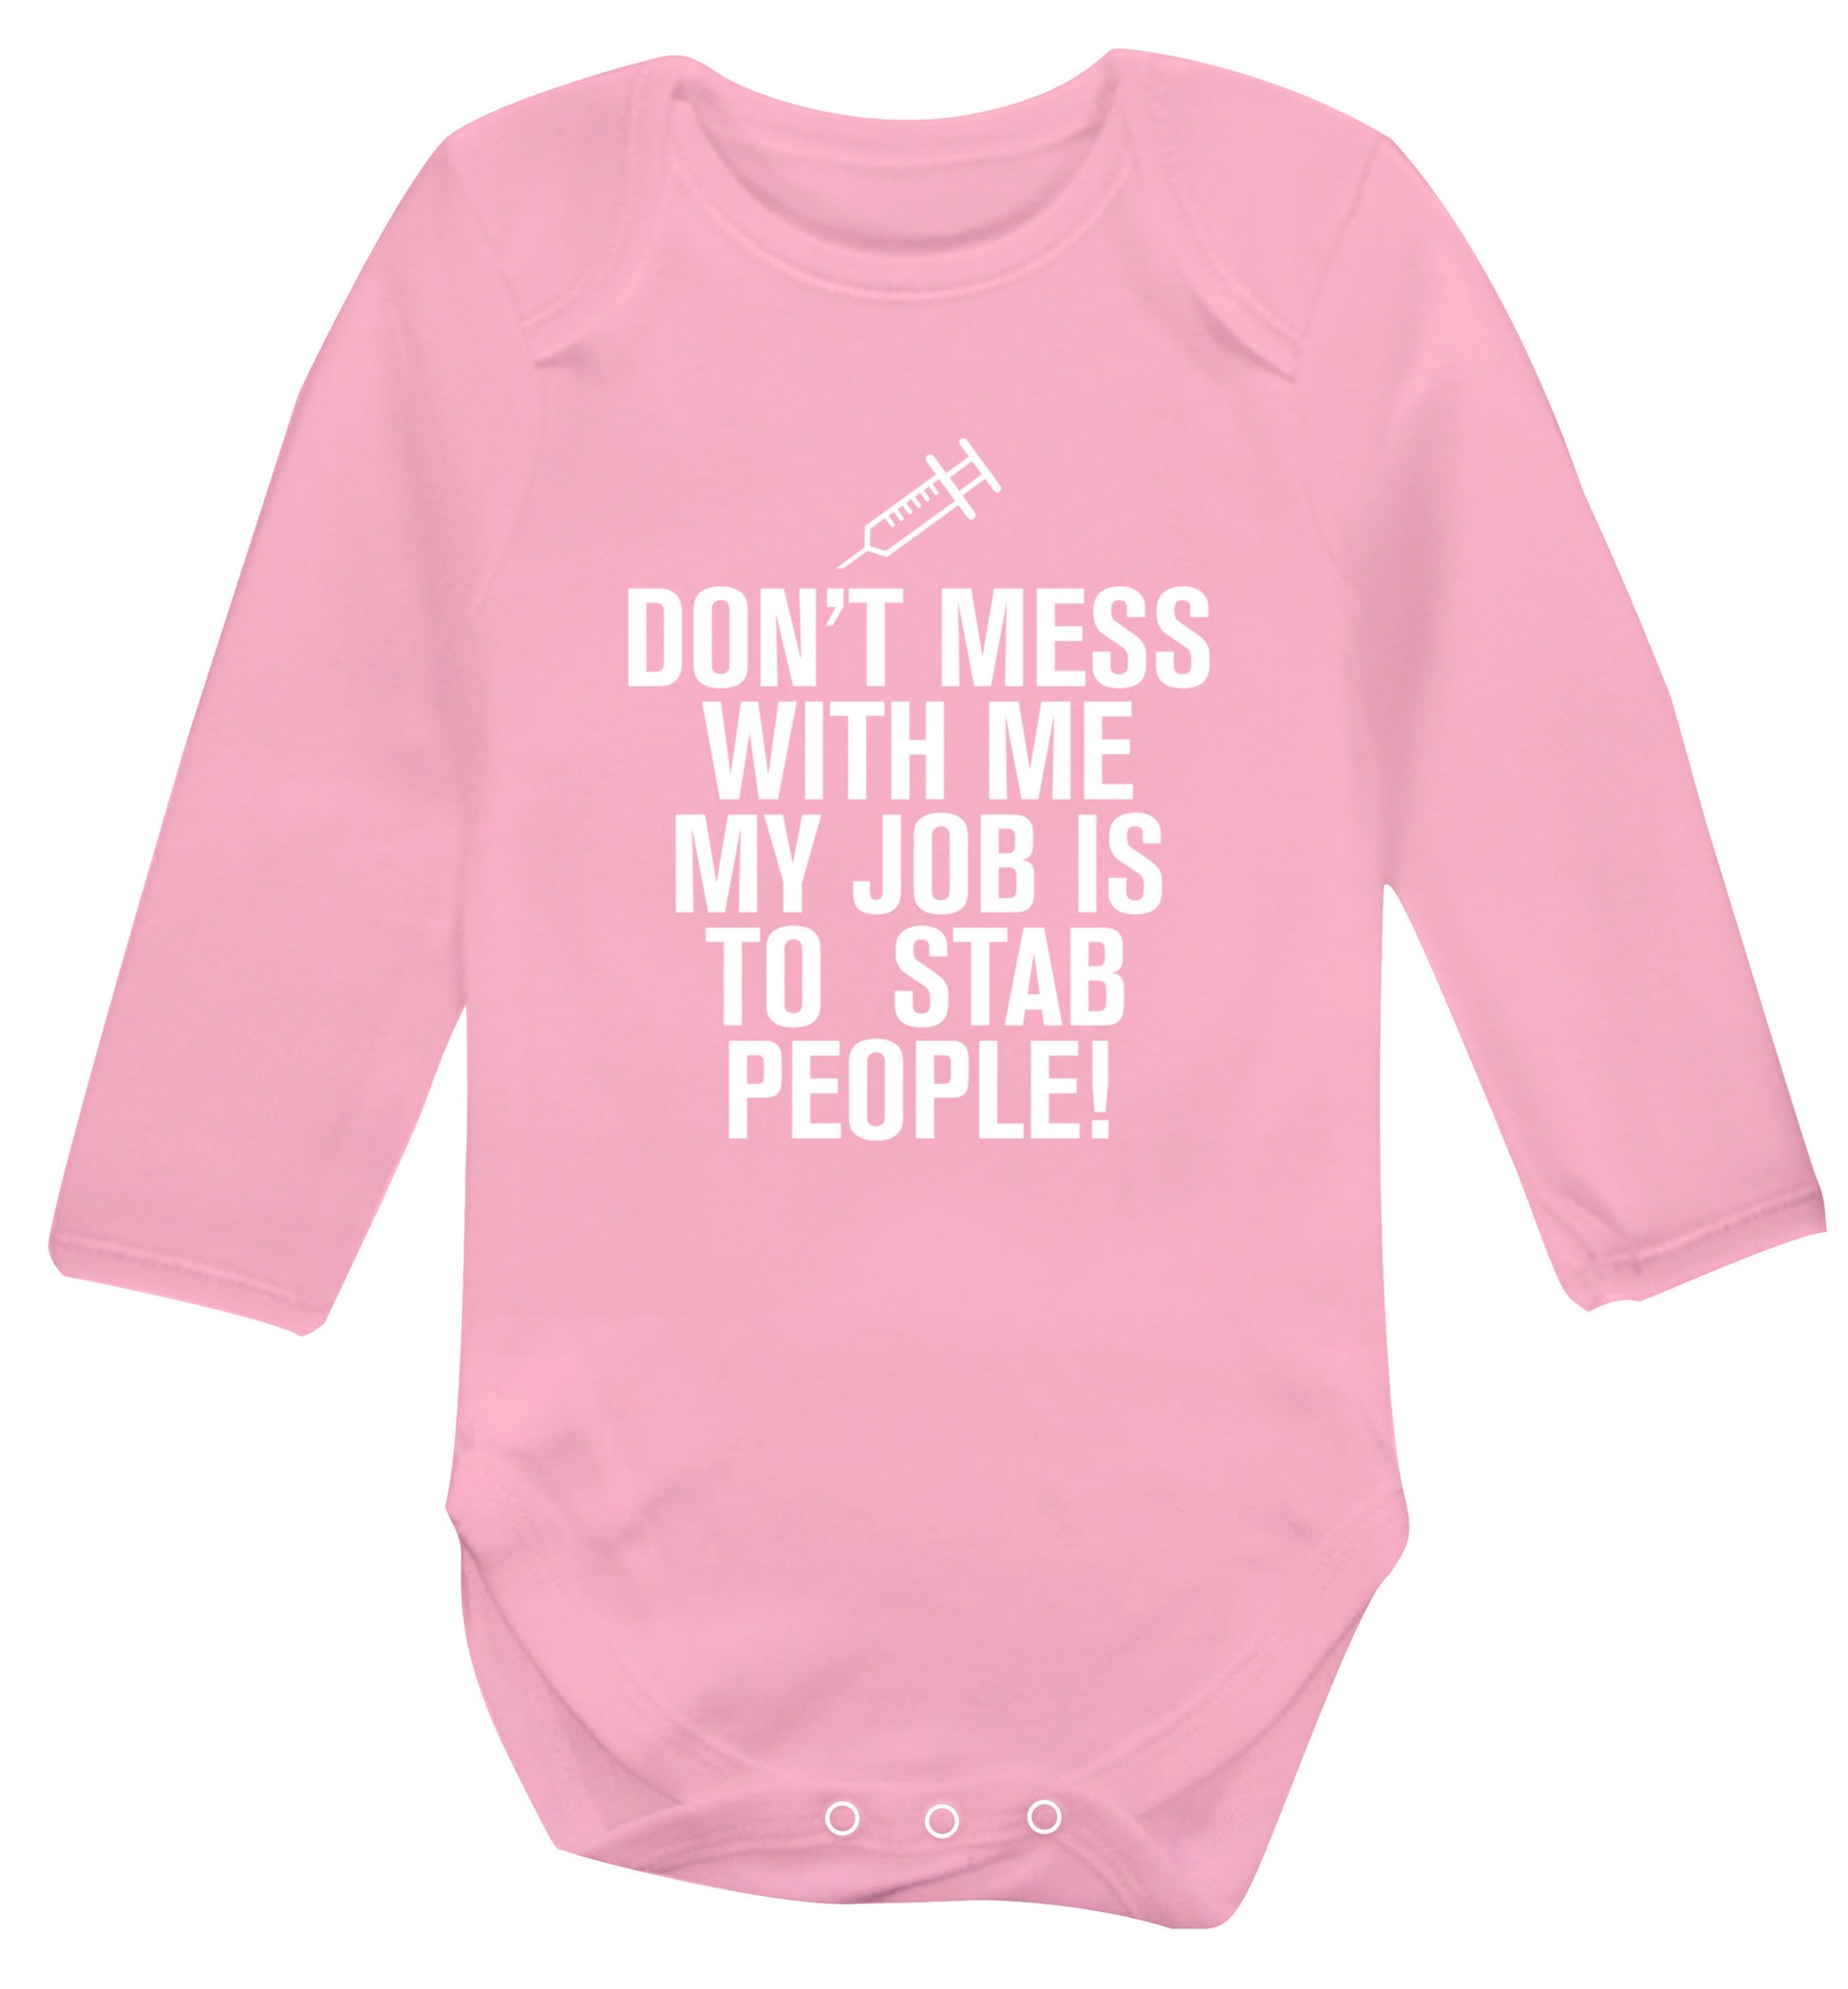 Don't mess with me my job is to stab people! Baby Vest long sleeved pale pink 6-12 months